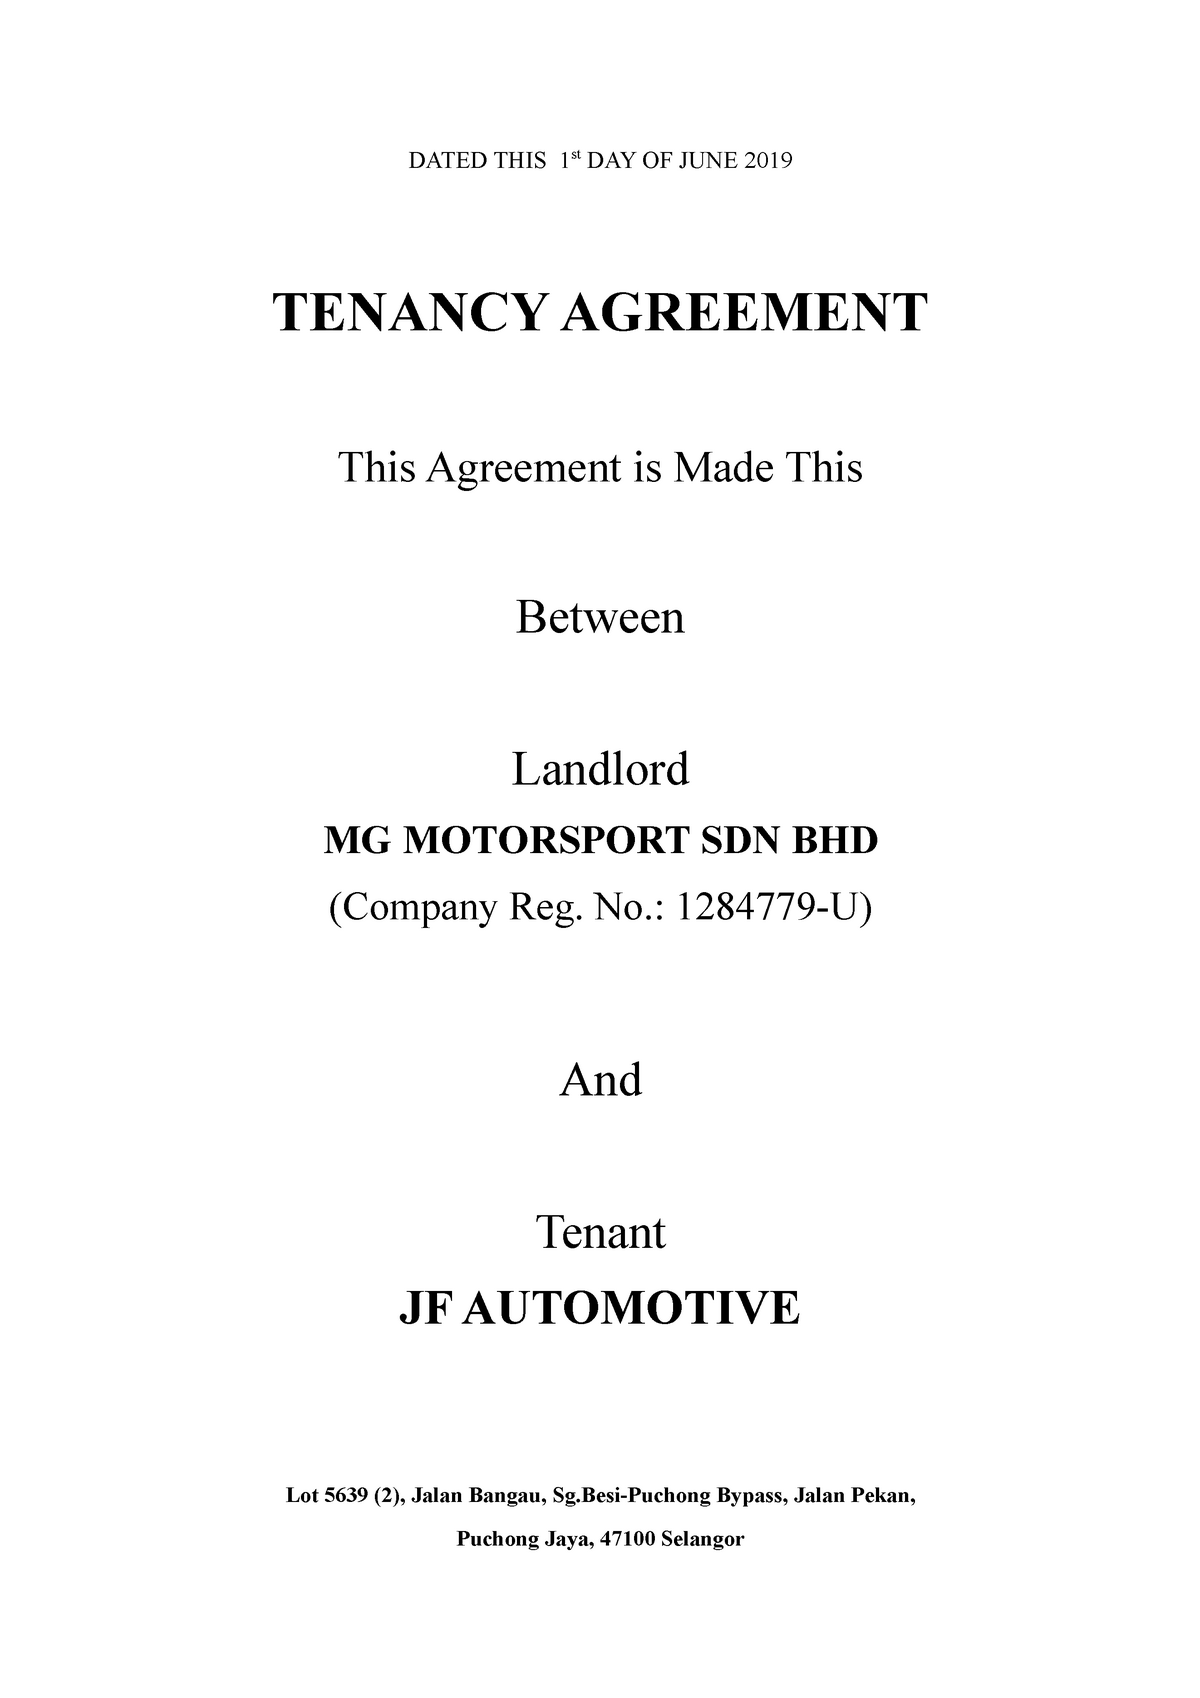 tenancy-agreement-draft-dated-this-1st-day-of-june-2019-tenancy-agreement-this-agreement-is